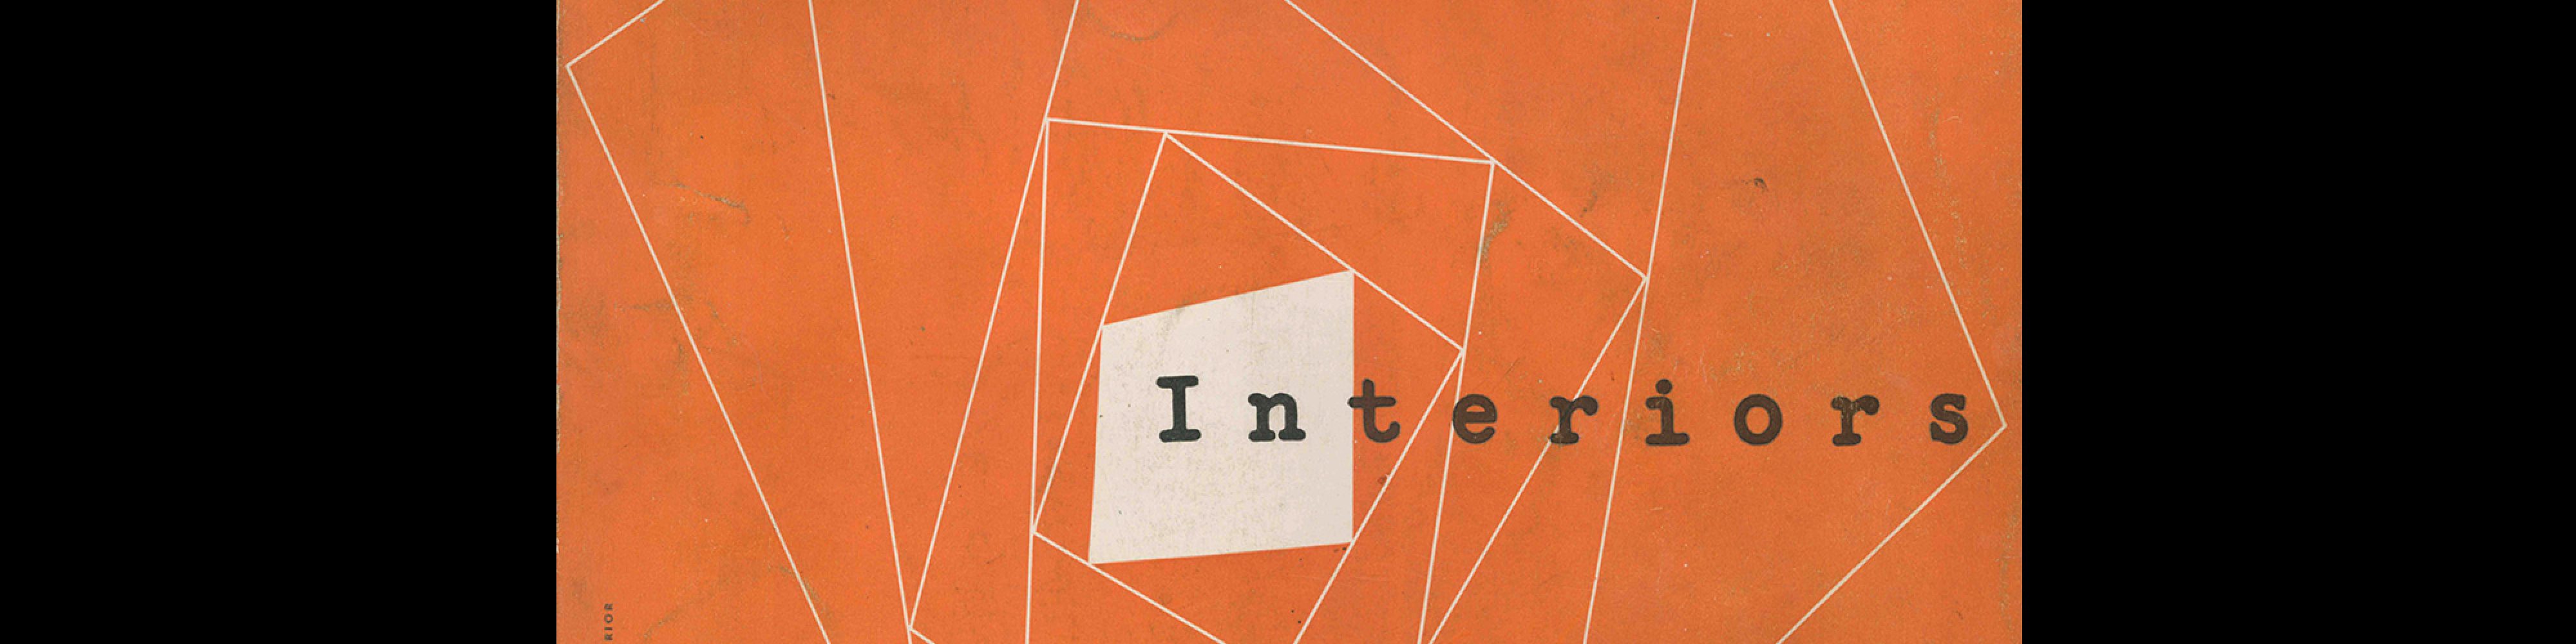 Interiors, July 1950. Cover design by Hubert Leckie